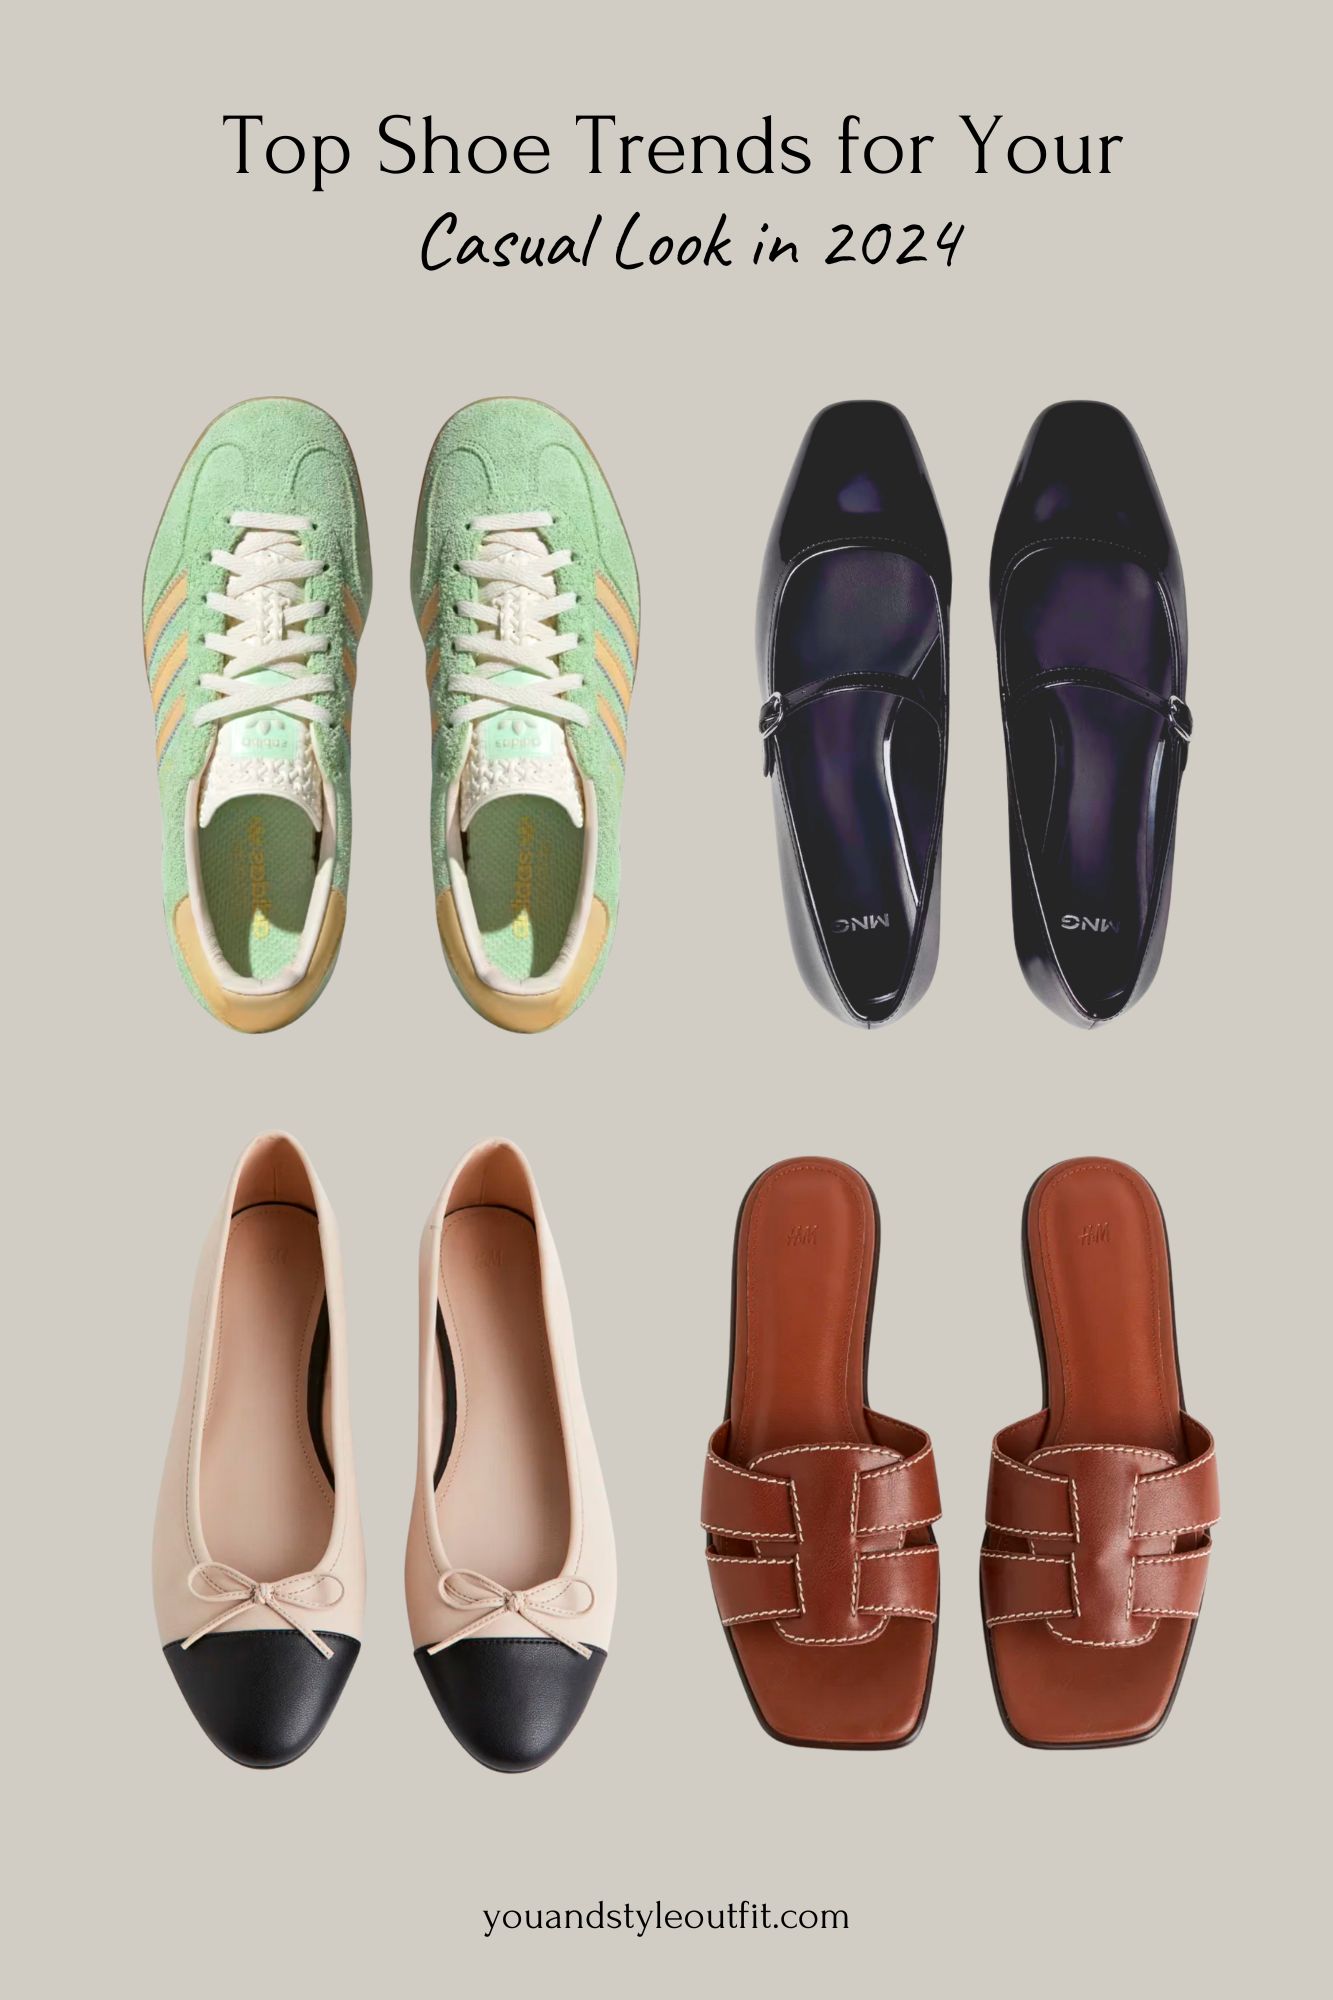 Top Shoe Trends for Your Casual Look in 2024